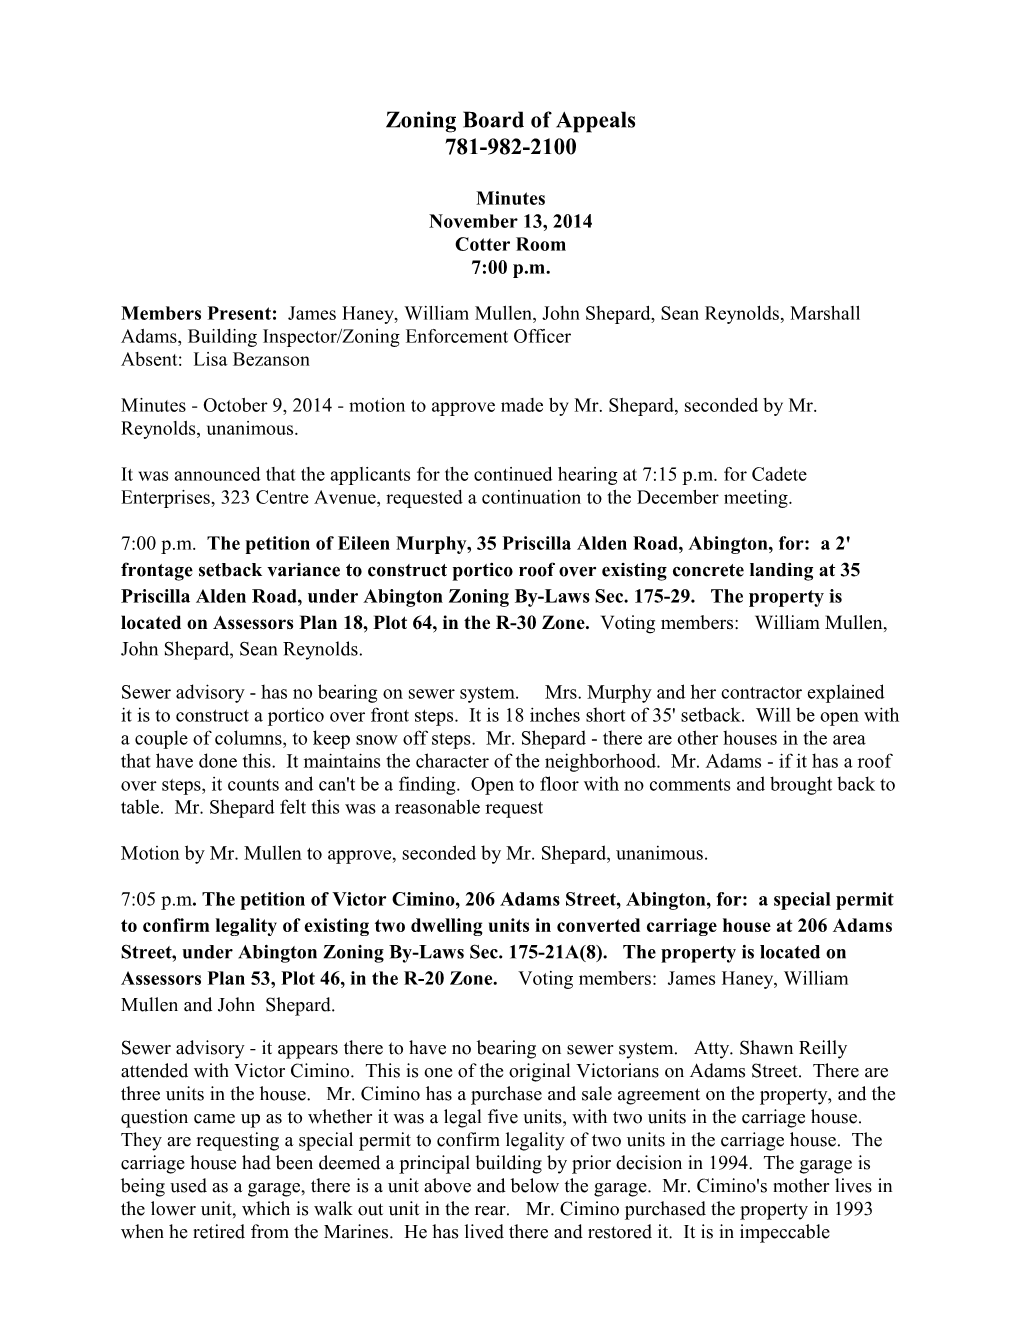 Zoning Board of Appeals Minutes November 13, 2014